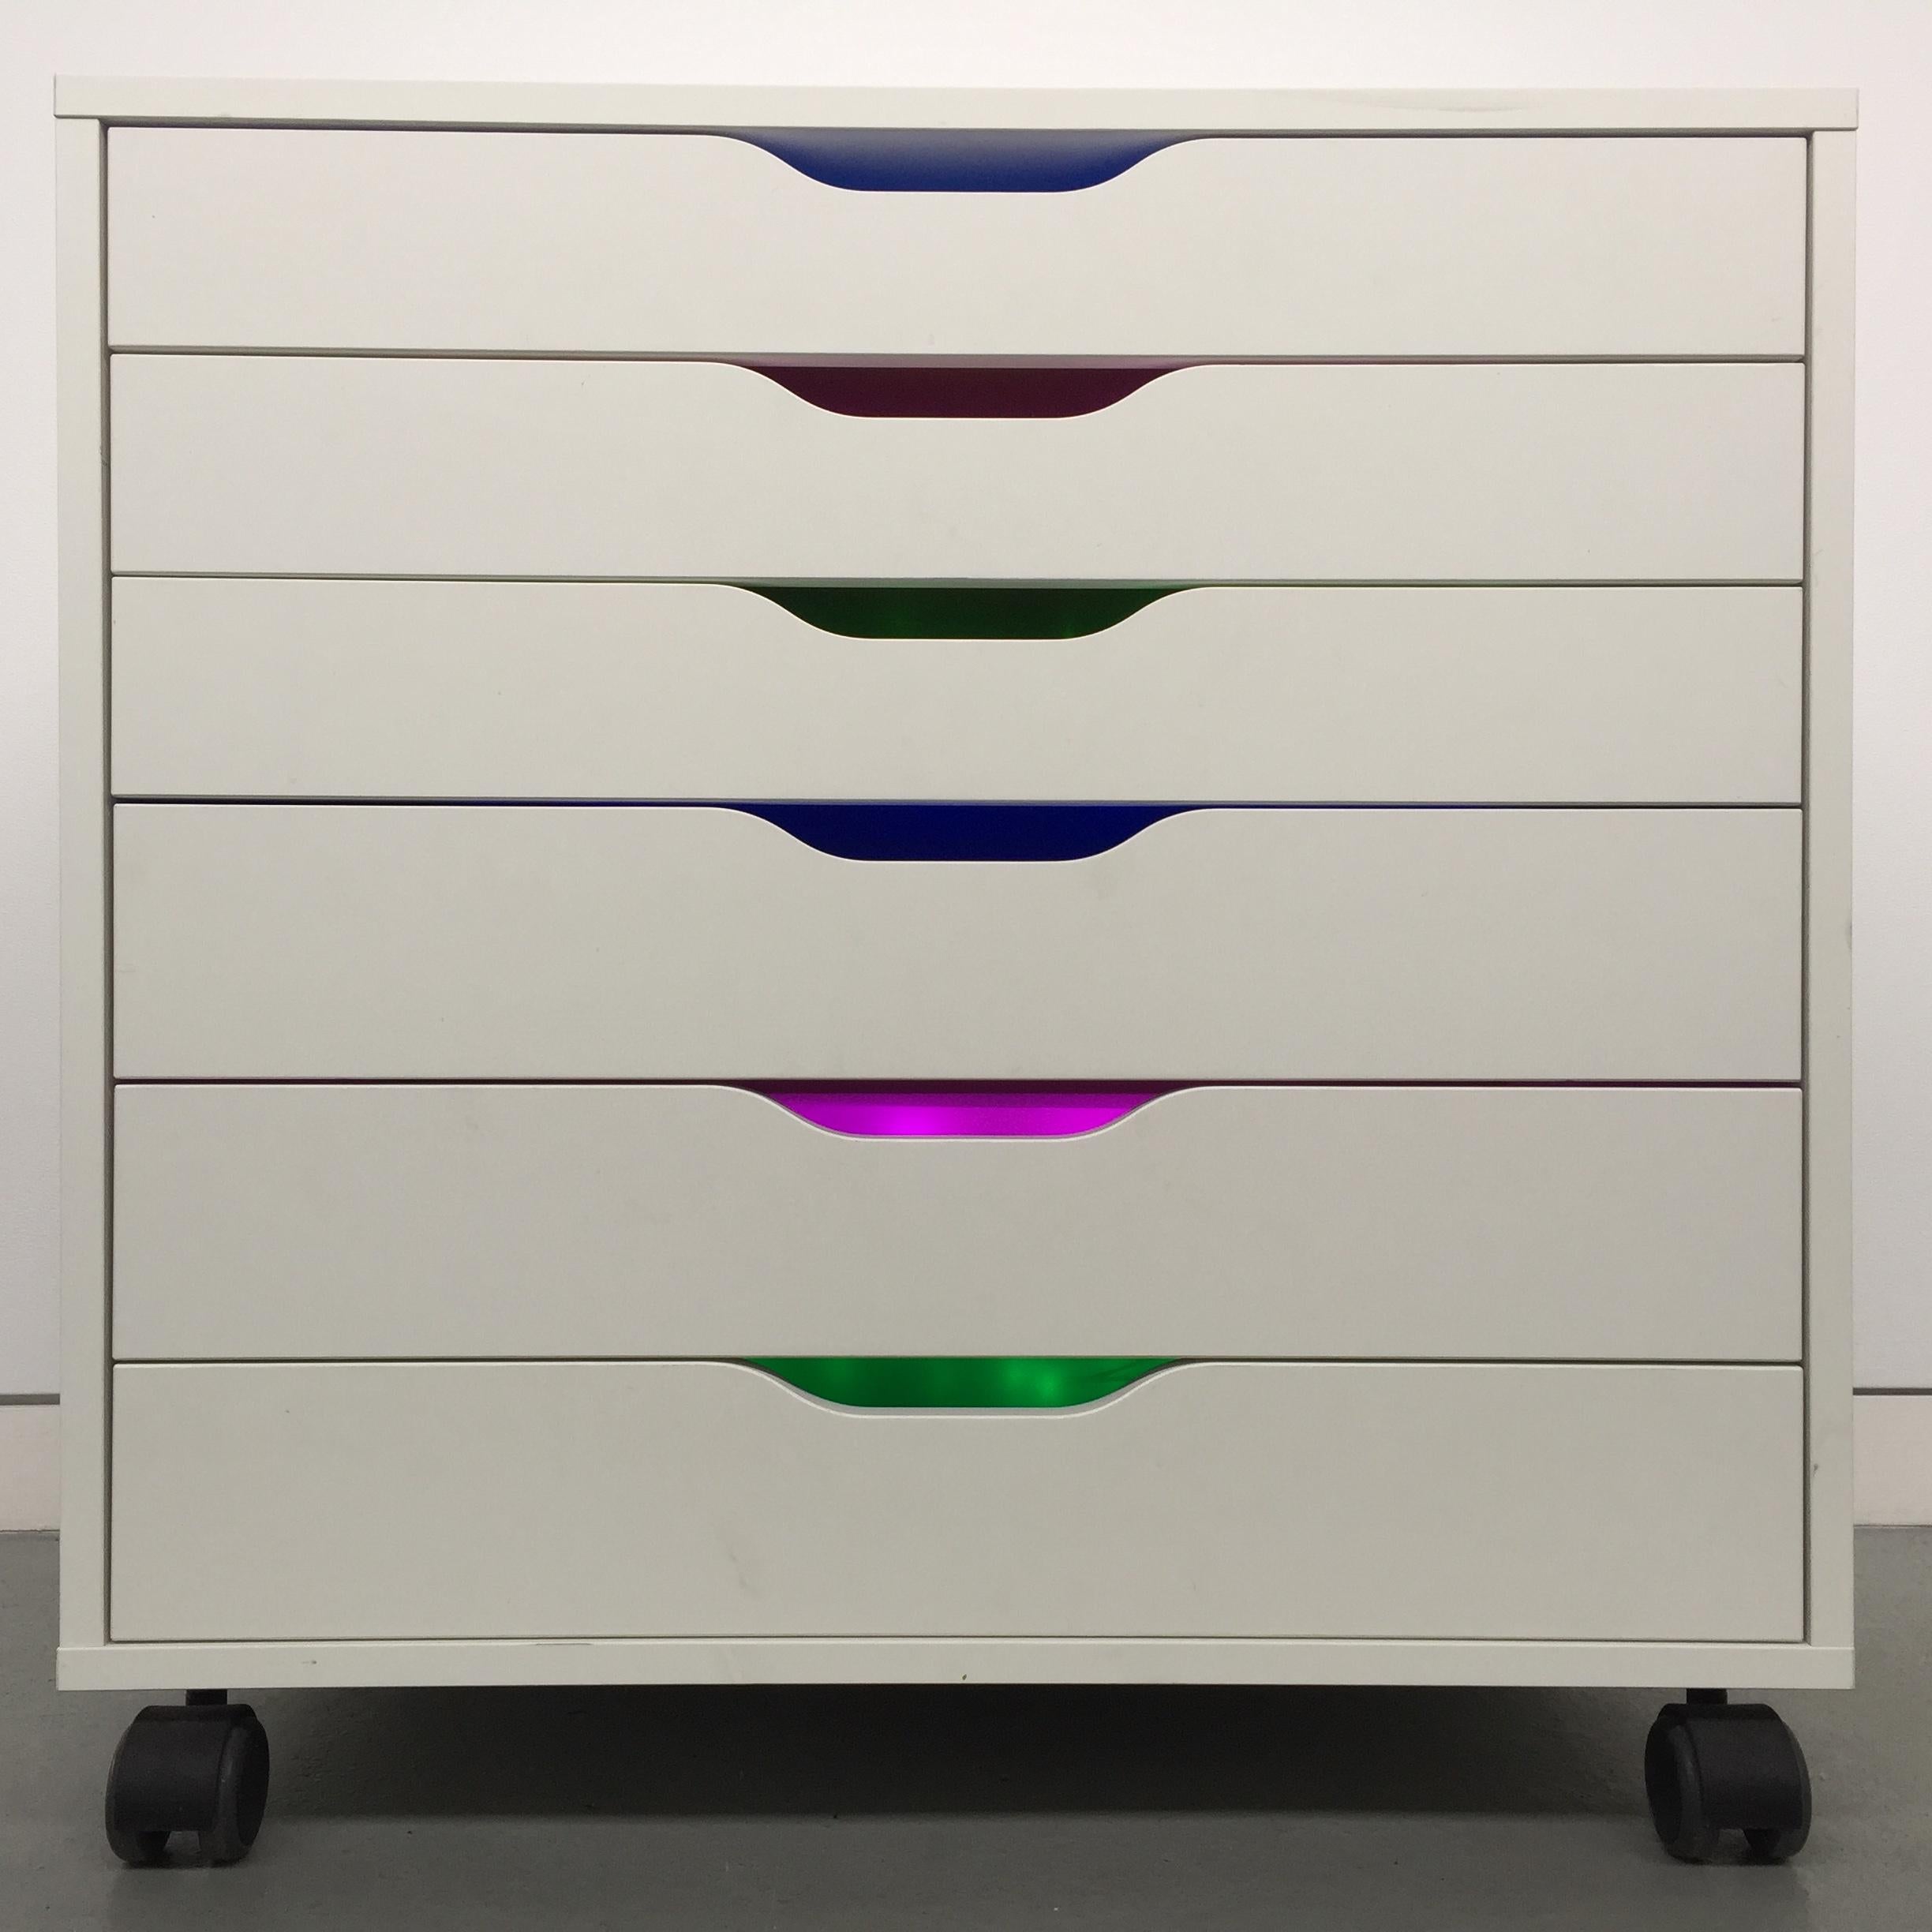 
Color Forms Cabinet: After House 5B and After Eagle Street is a site specific installation of drawings combined with theatre gels and LED lights. Deanna Lee transformed the six drawers of ODETTA's readymade flat file cabinet into a site specific